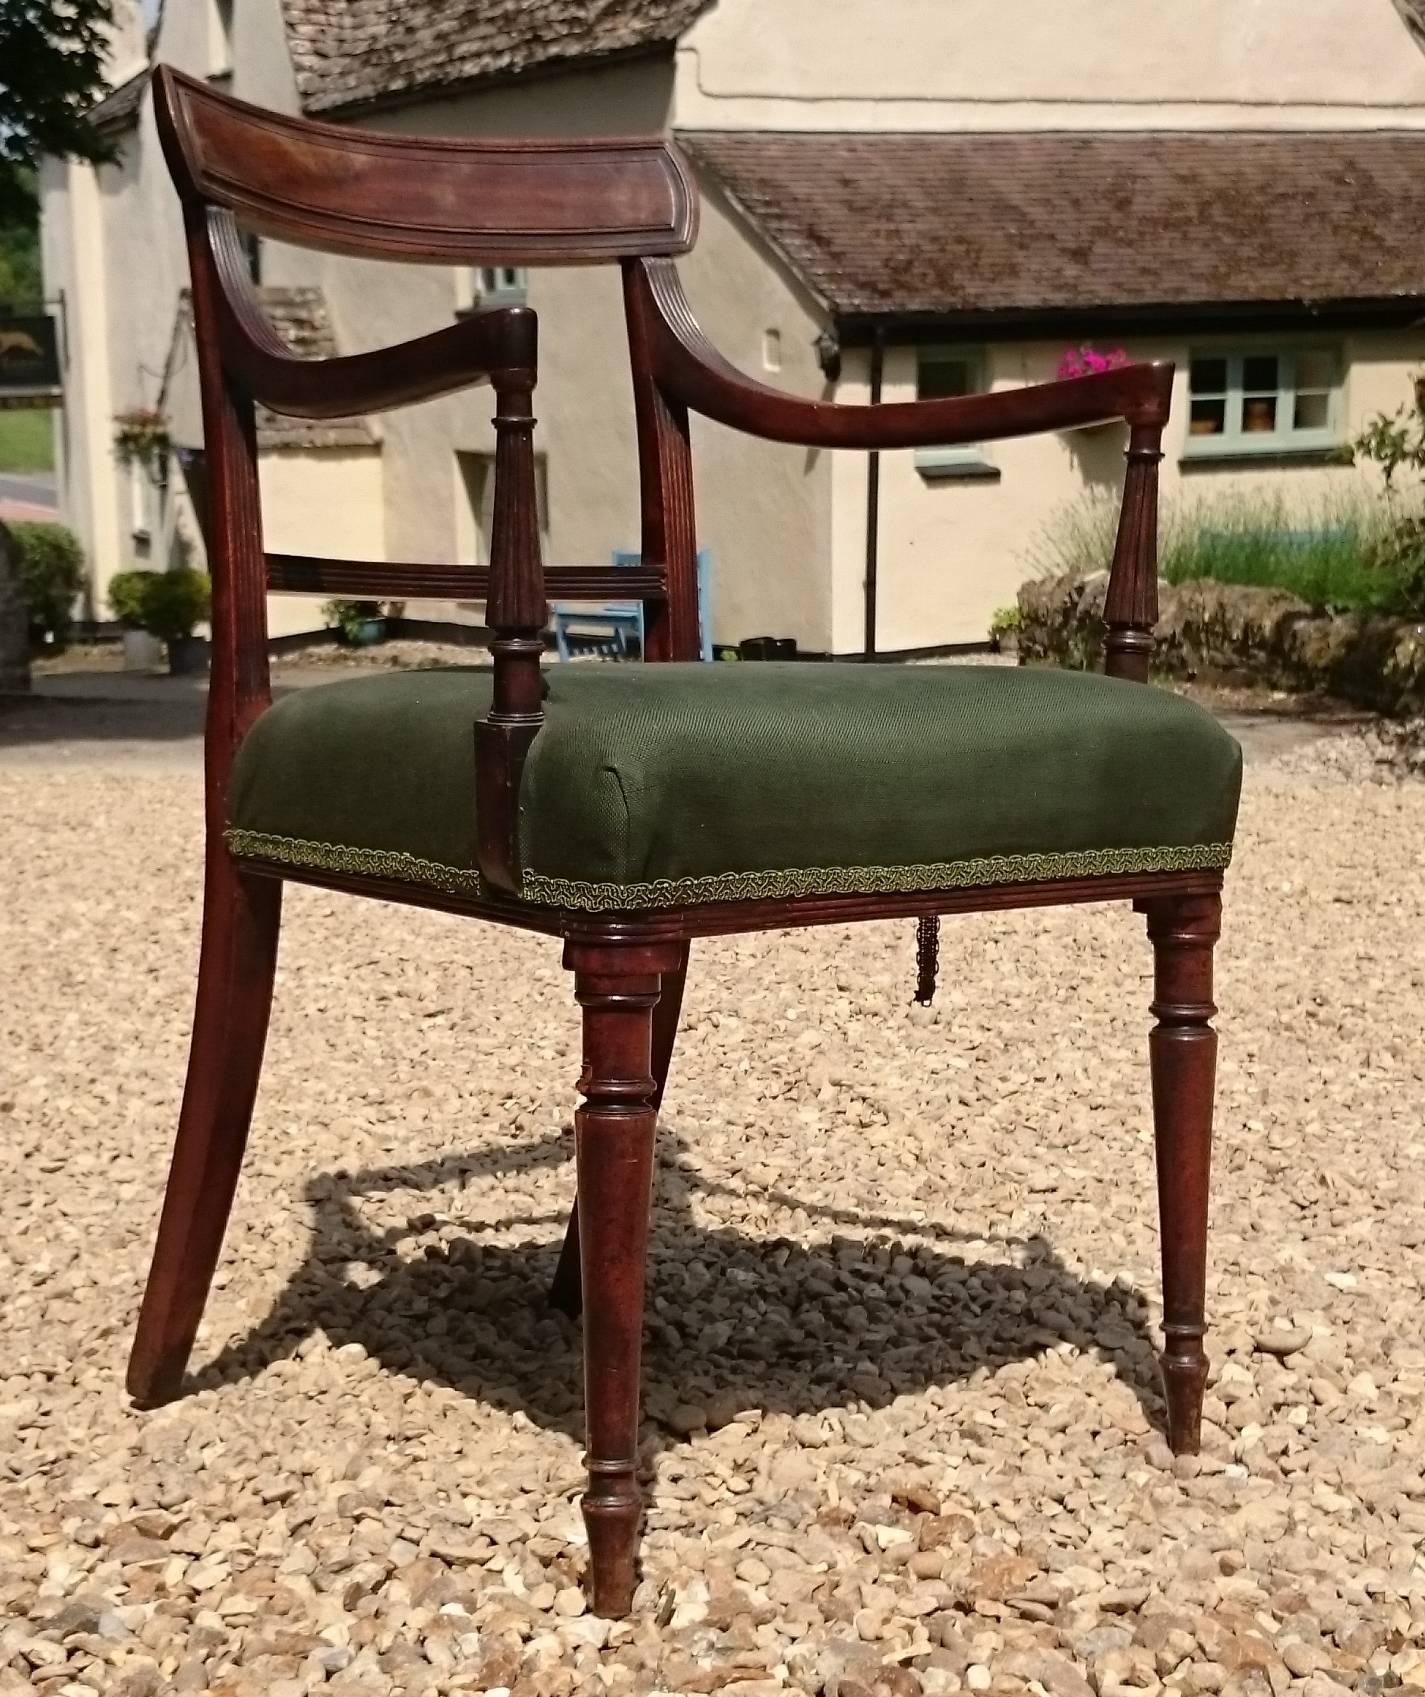 British Early 19th Century Mahogany George III Period Antique Armchair or Desk Chair